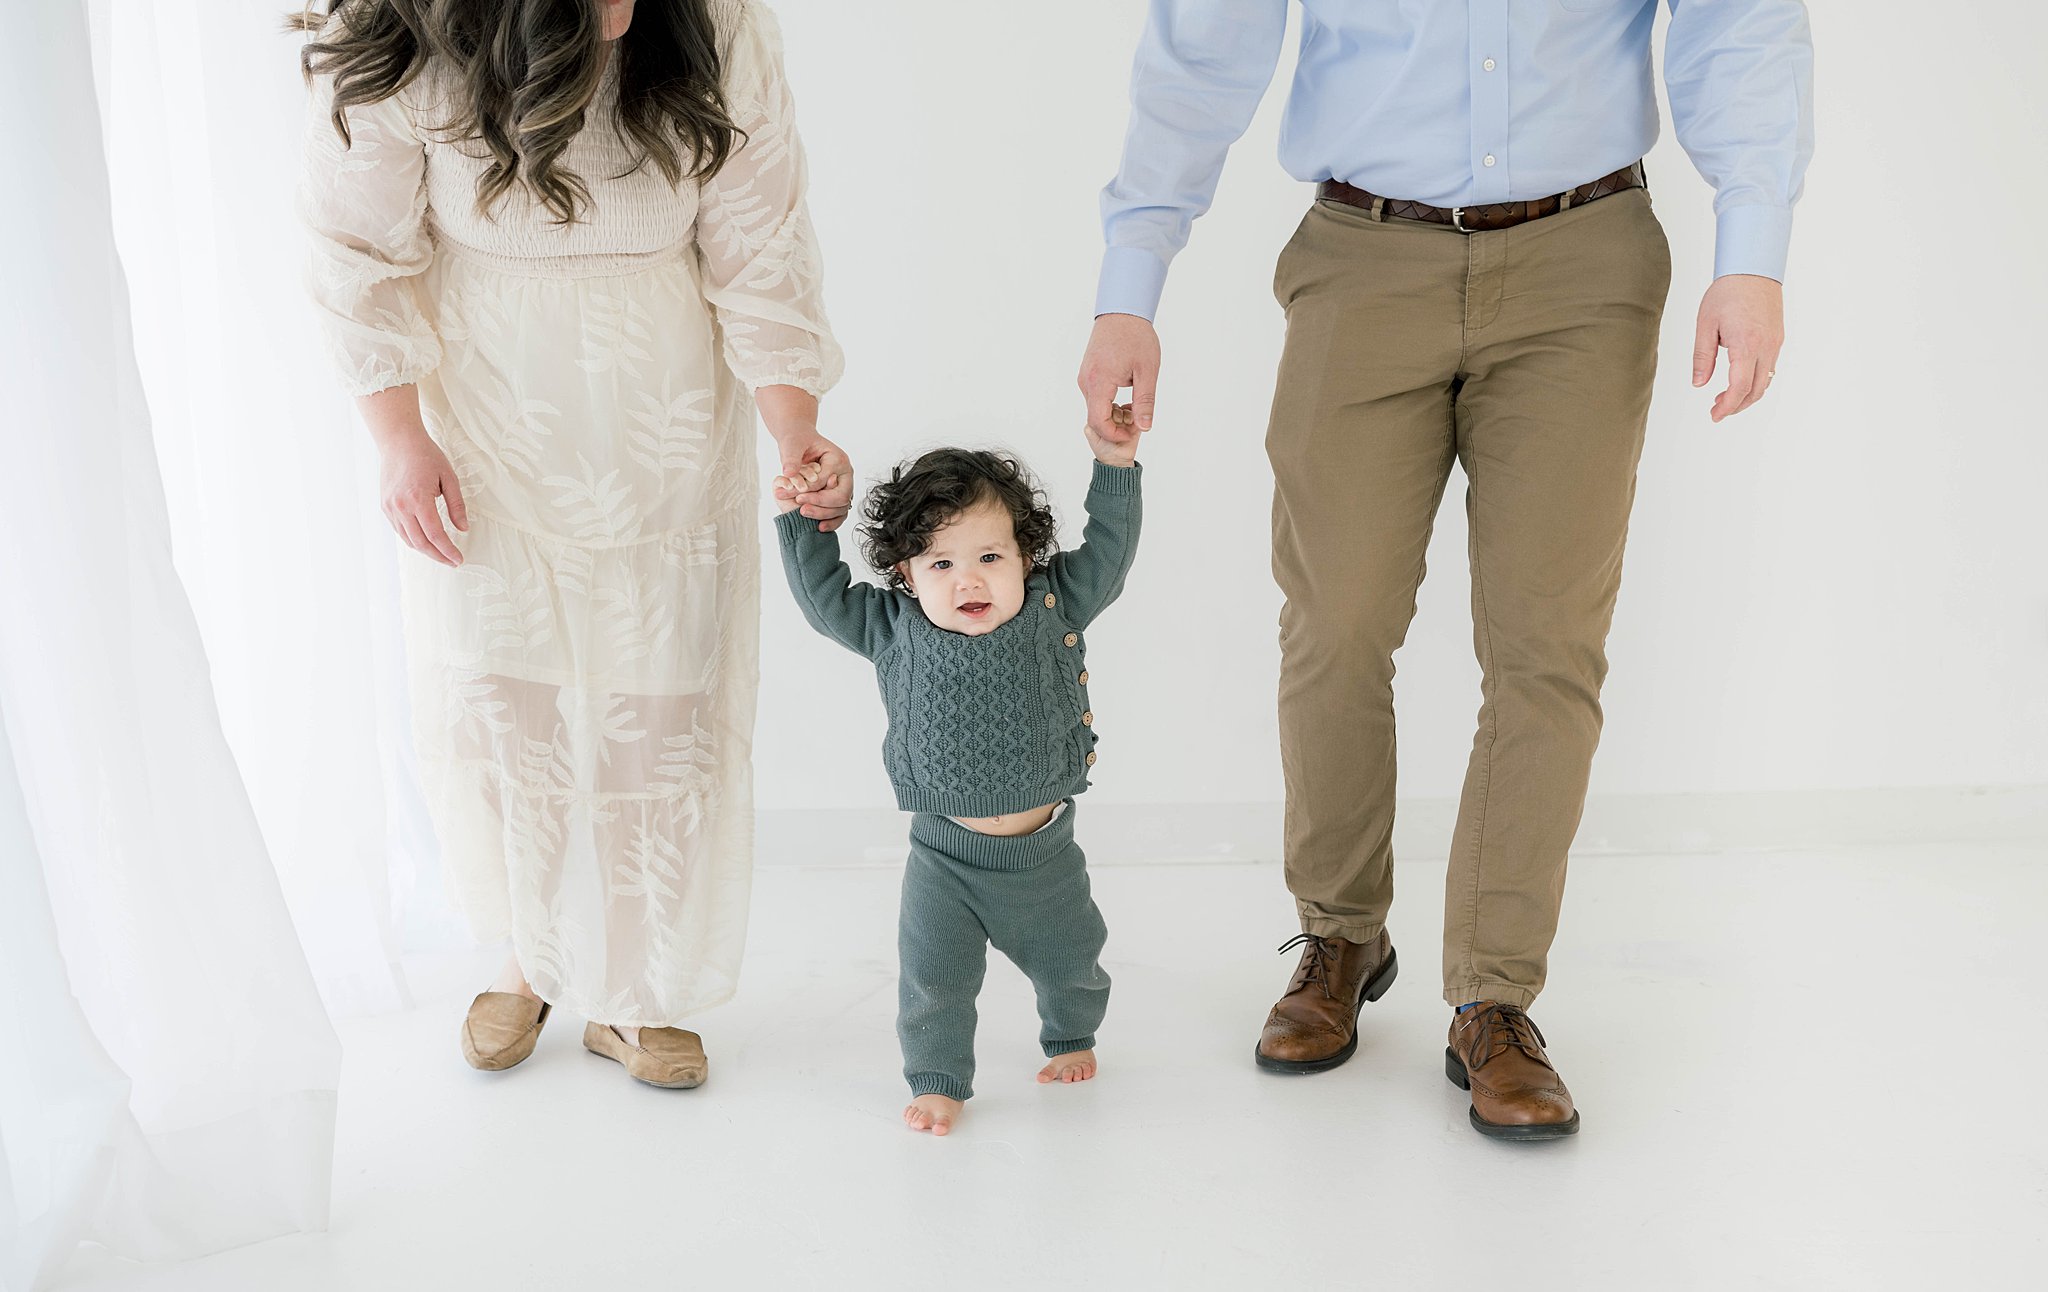 A mother in a white lace dress and father in khaki pants hold the hands of their toddler son while walking through a studio oklahoma city pediatricians